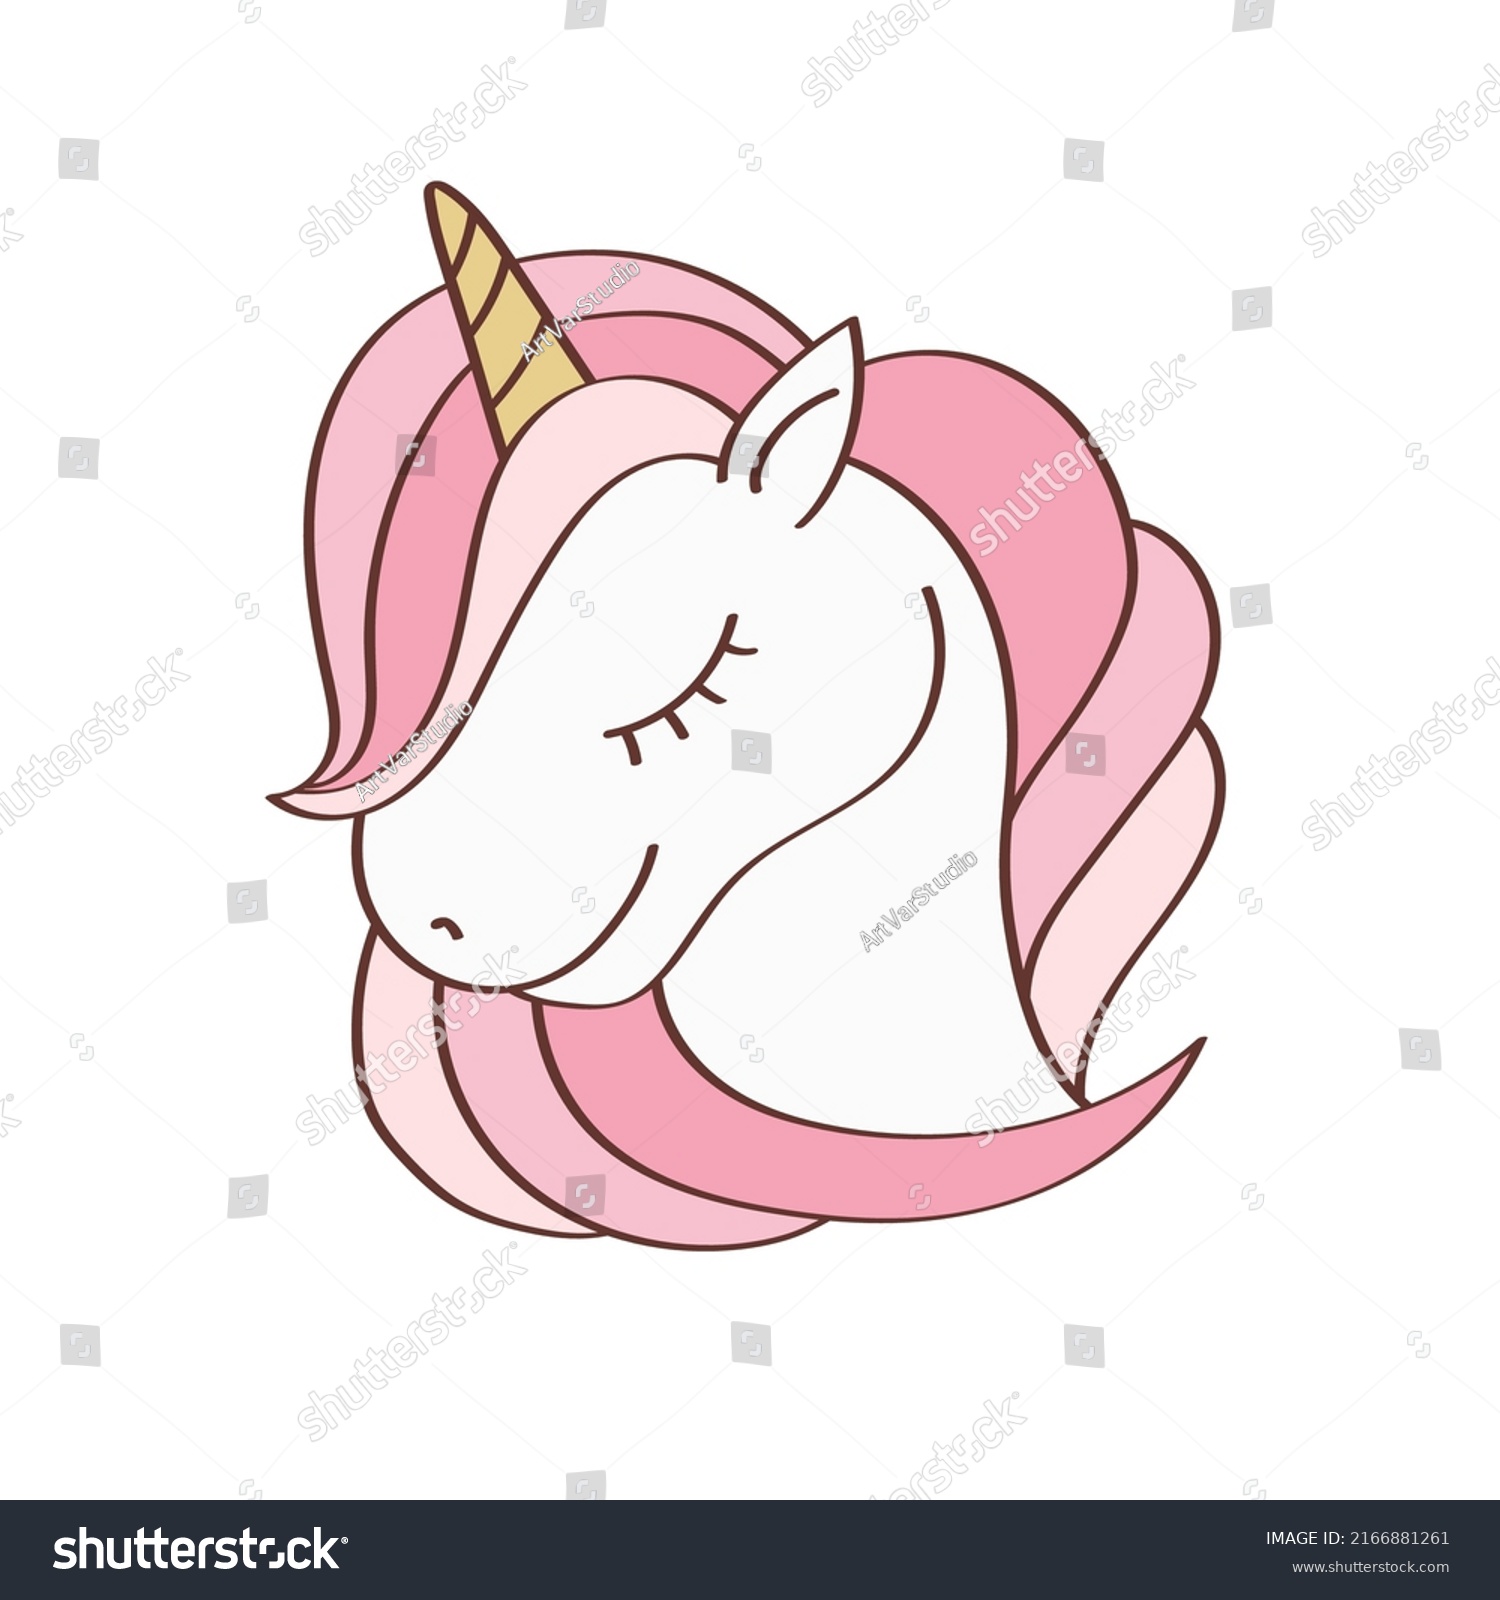 SVG of Clipart Unicorn Head in Cartoon Style. Cute Clip Art Unicorn Face. Vector Illustration of an Animal for Stickers, Baby Shower Invitation, Prints for Clothes, Textile.  svg